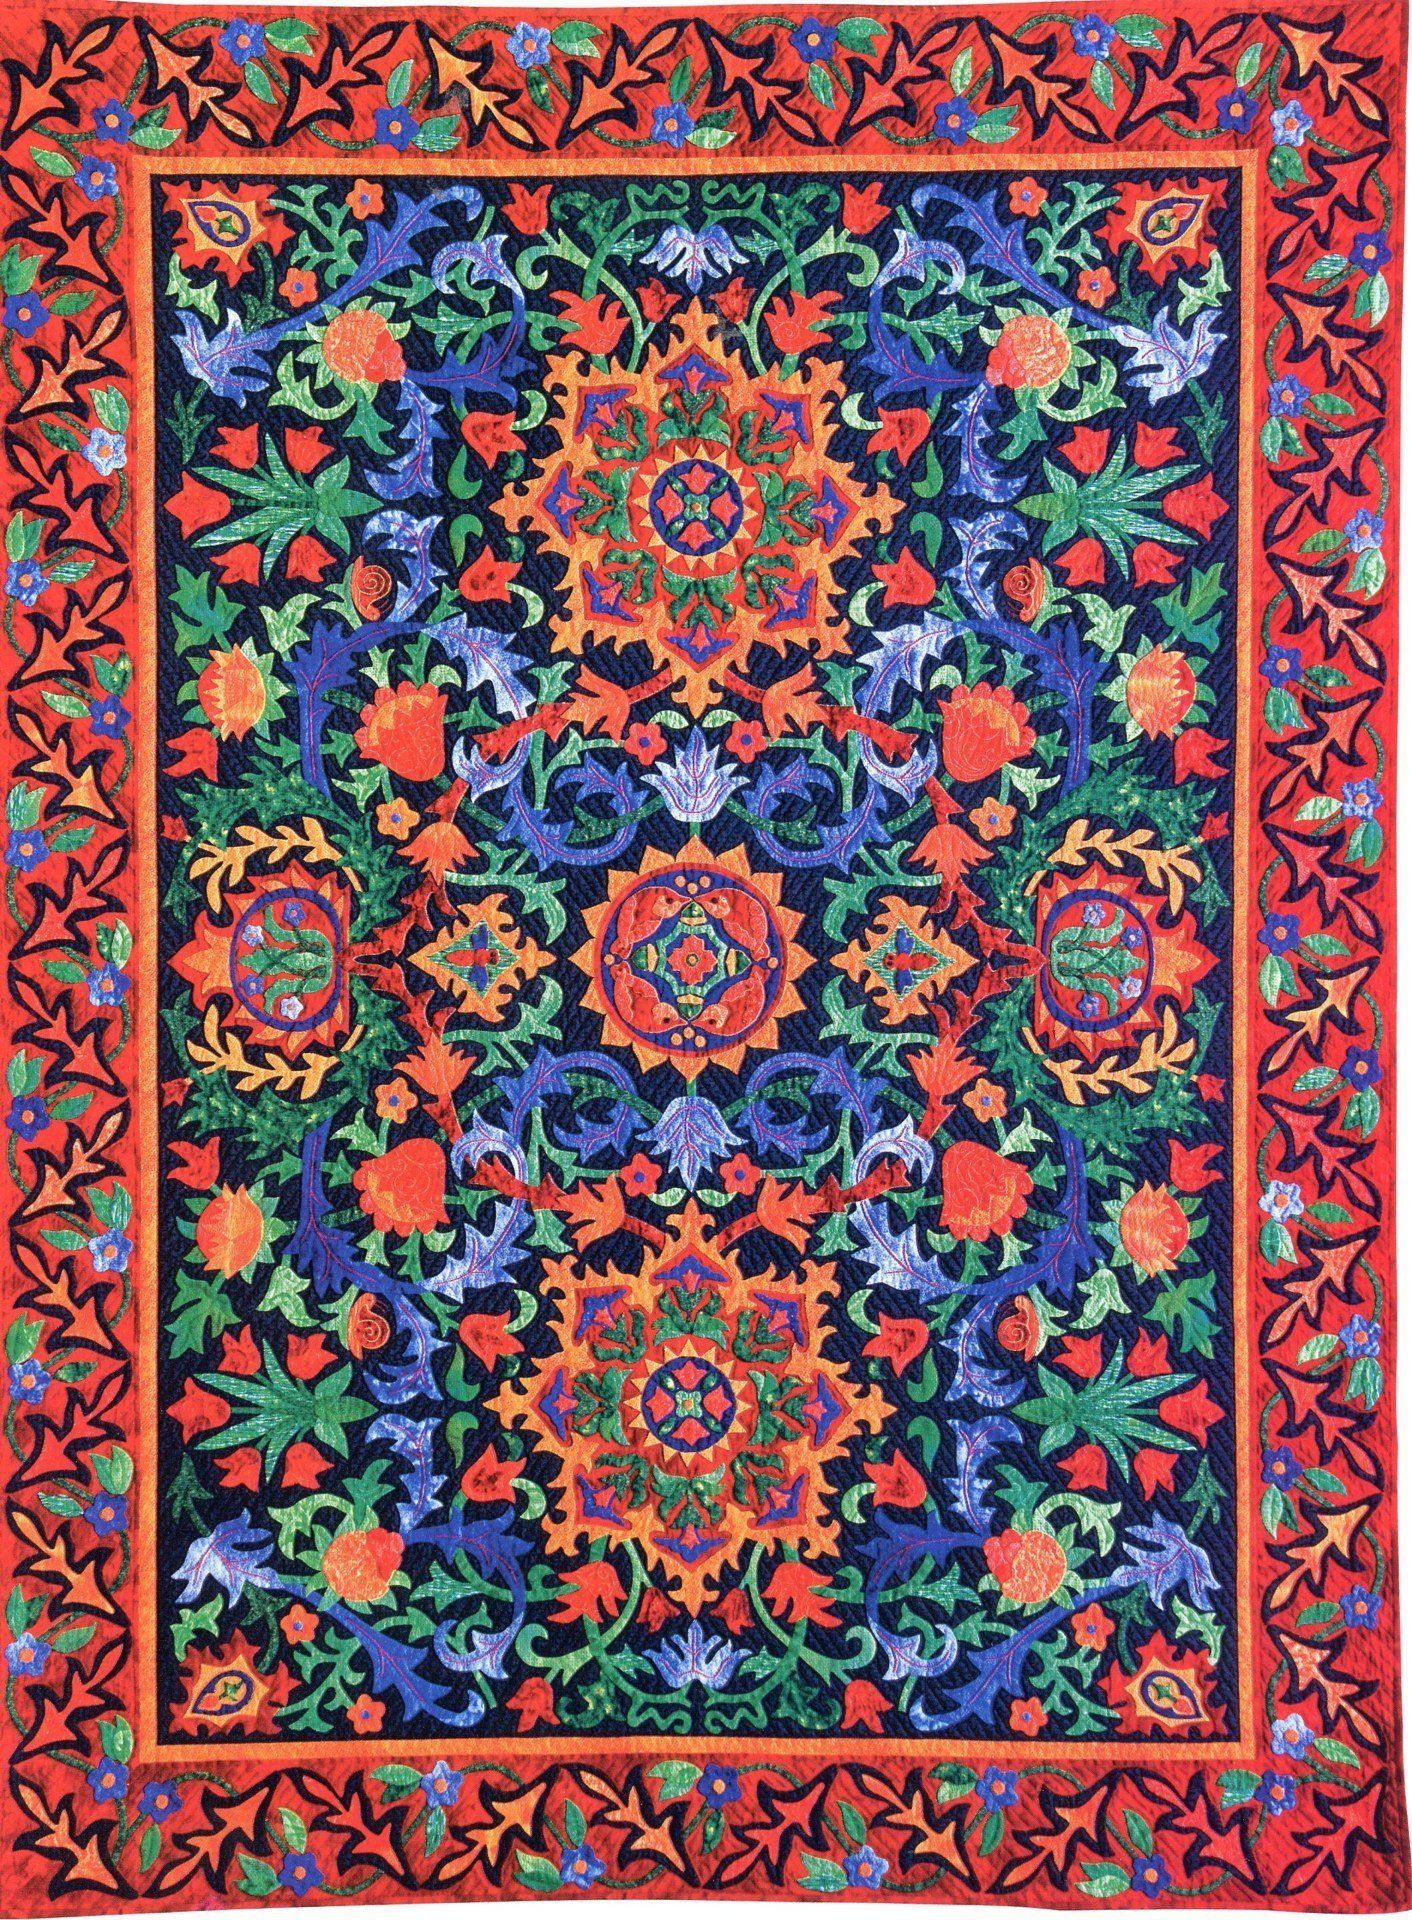 Arabesque Quilt by Suzanne Marshall, a Quilt Maker